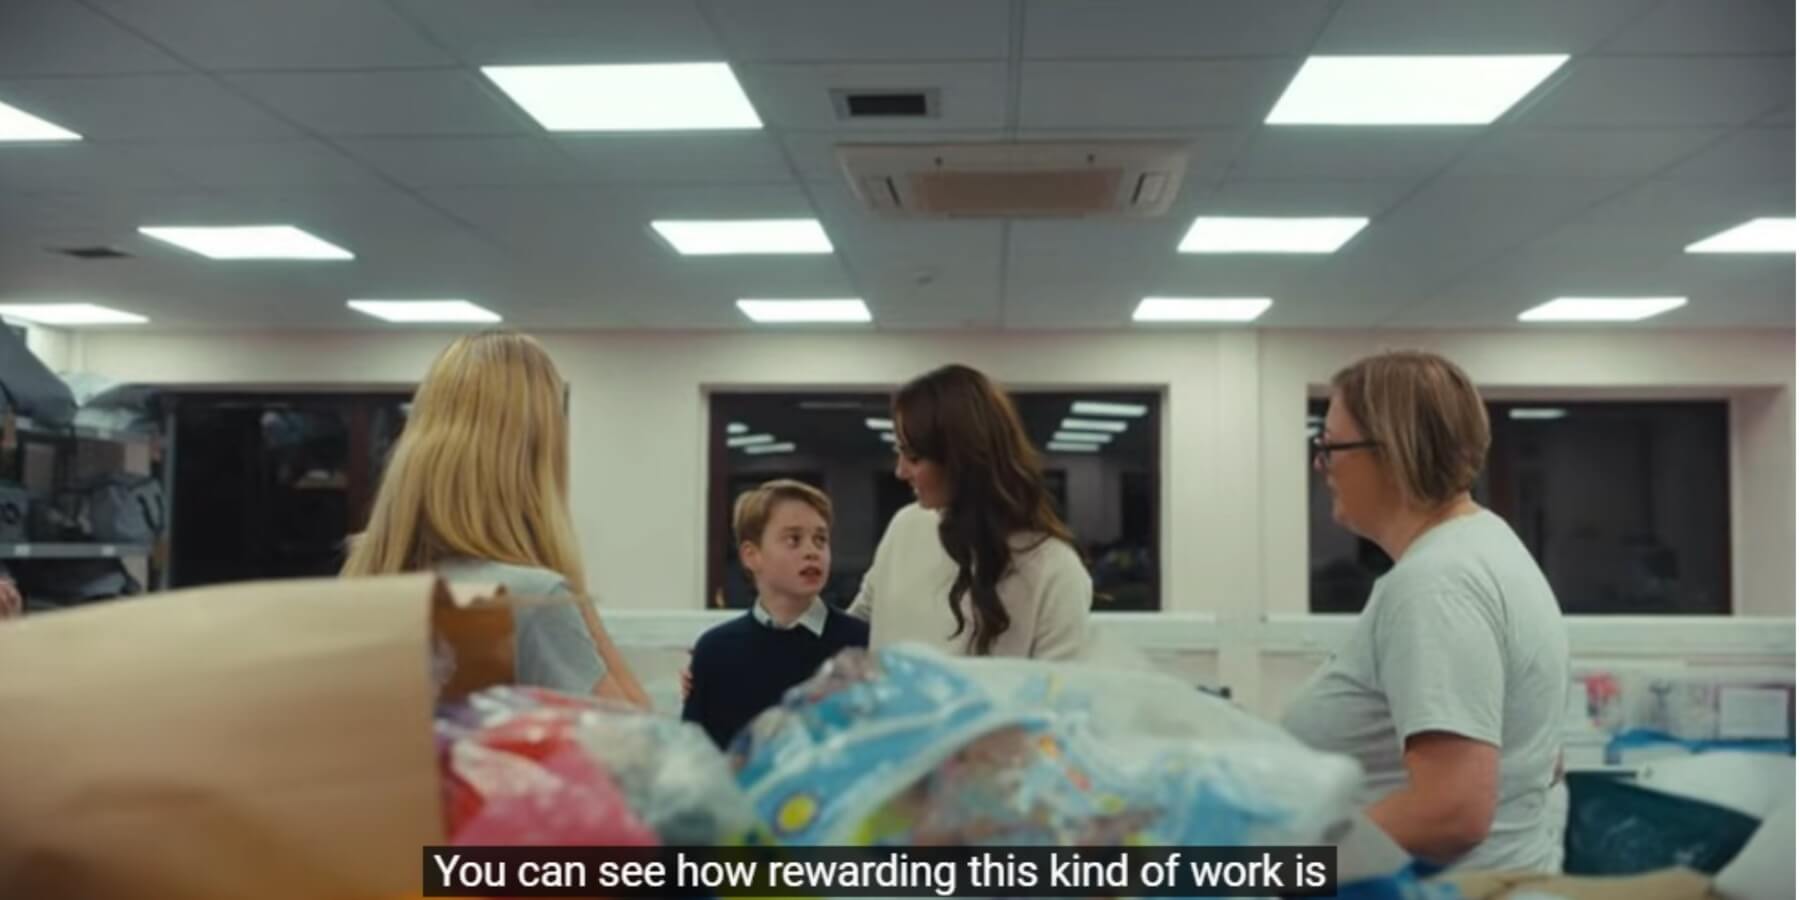 Prince George and Kate Middleton at the Baby Bank during a YouTube video released by the Prince and Princess of Wales.